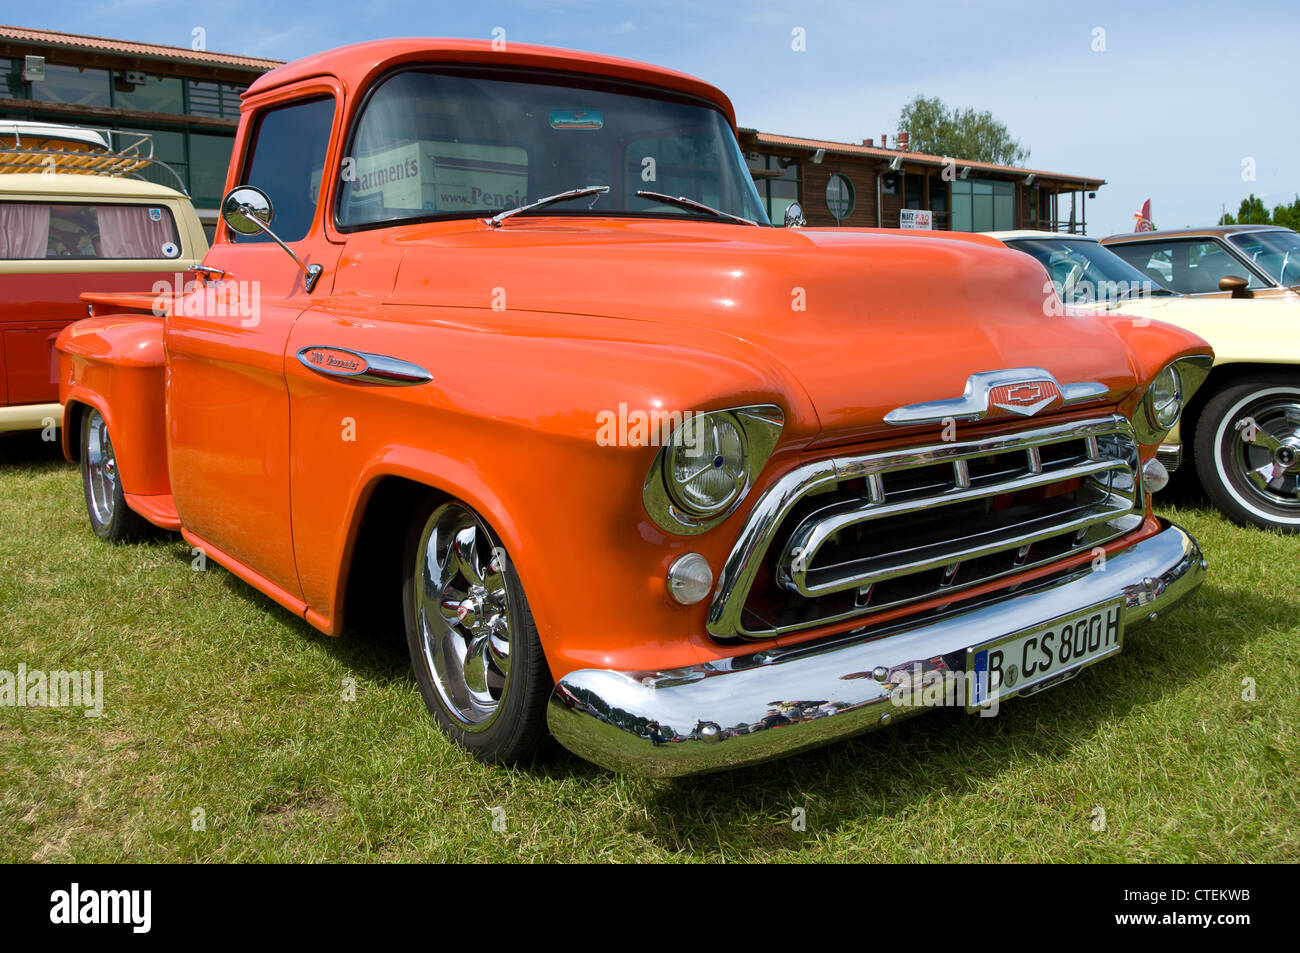 Small Truck Chevrolet 3100 Task Force Stock Photo